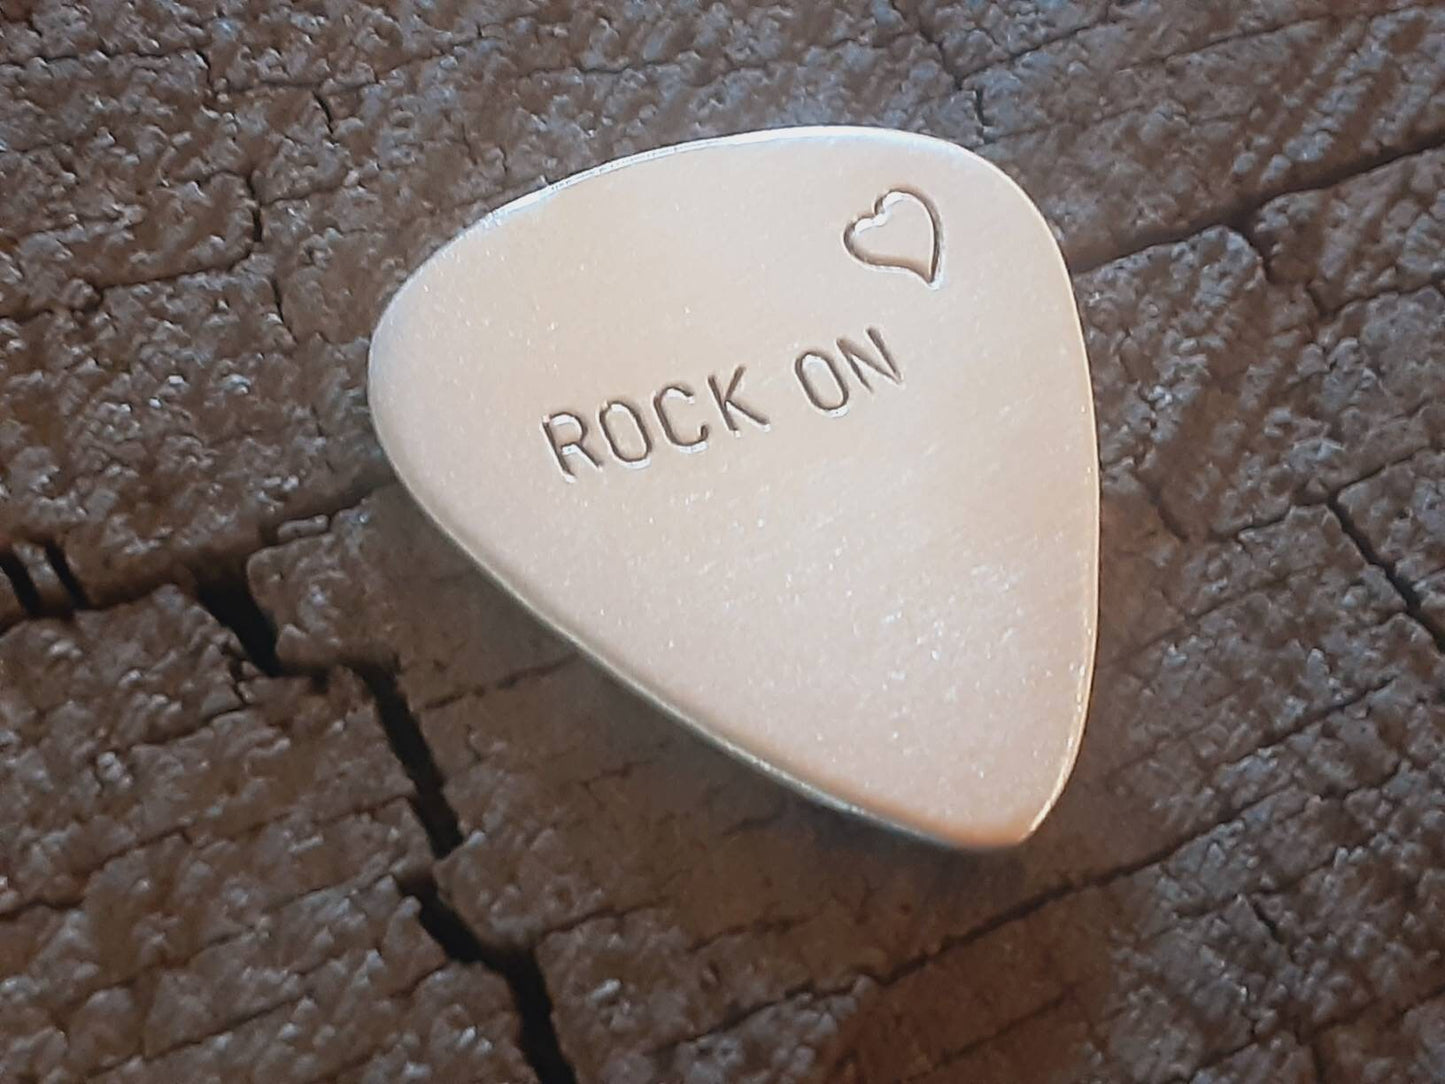 Sterling silver guitar pick - playable with rock on